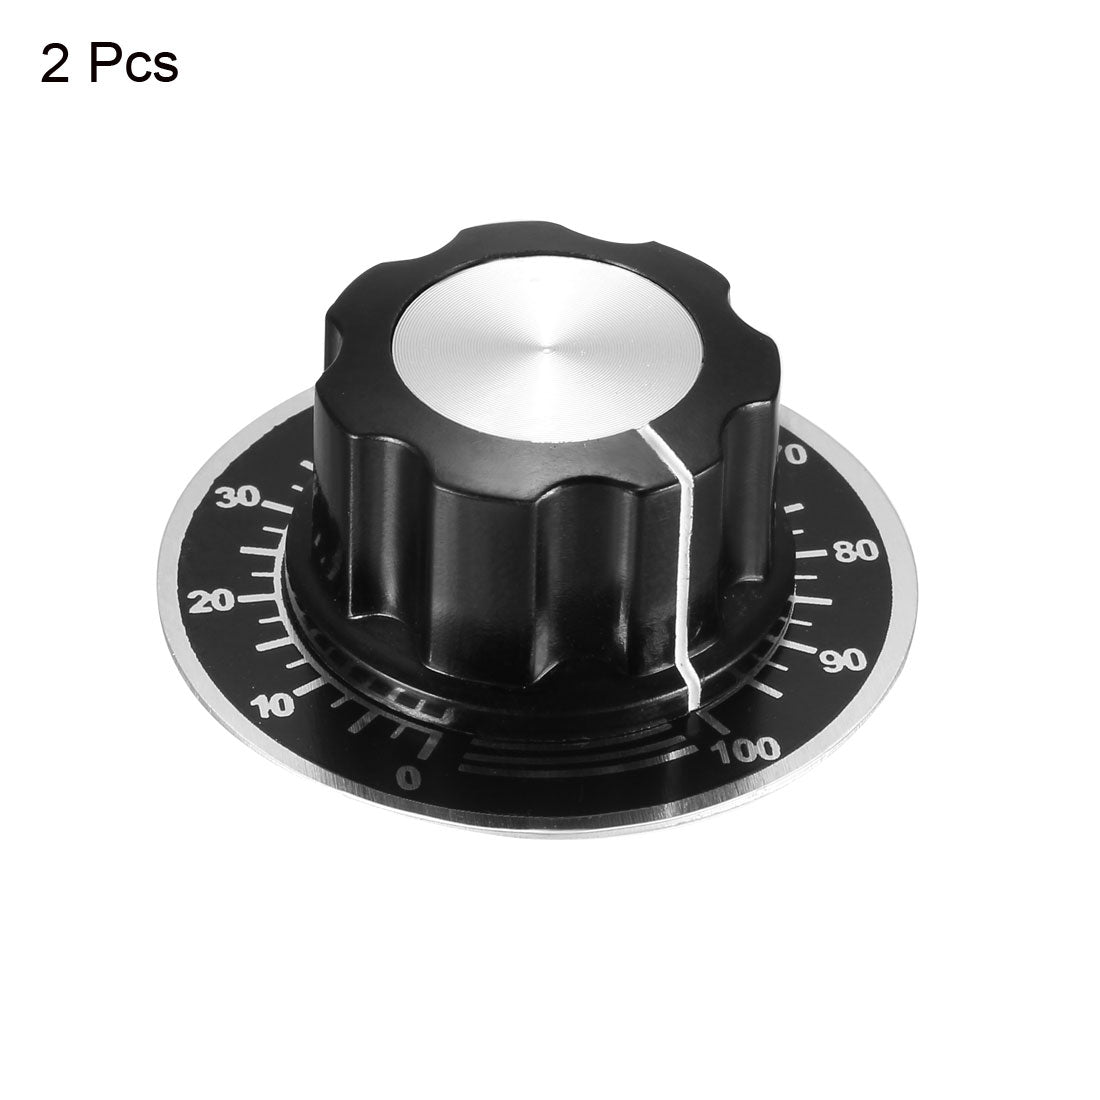 uxcell Uxcell 2Pcs Speaker Control Knob Volume Control Cap with 2pcs Digital Dial Scale Plate Potentiometer Rotate Button Control